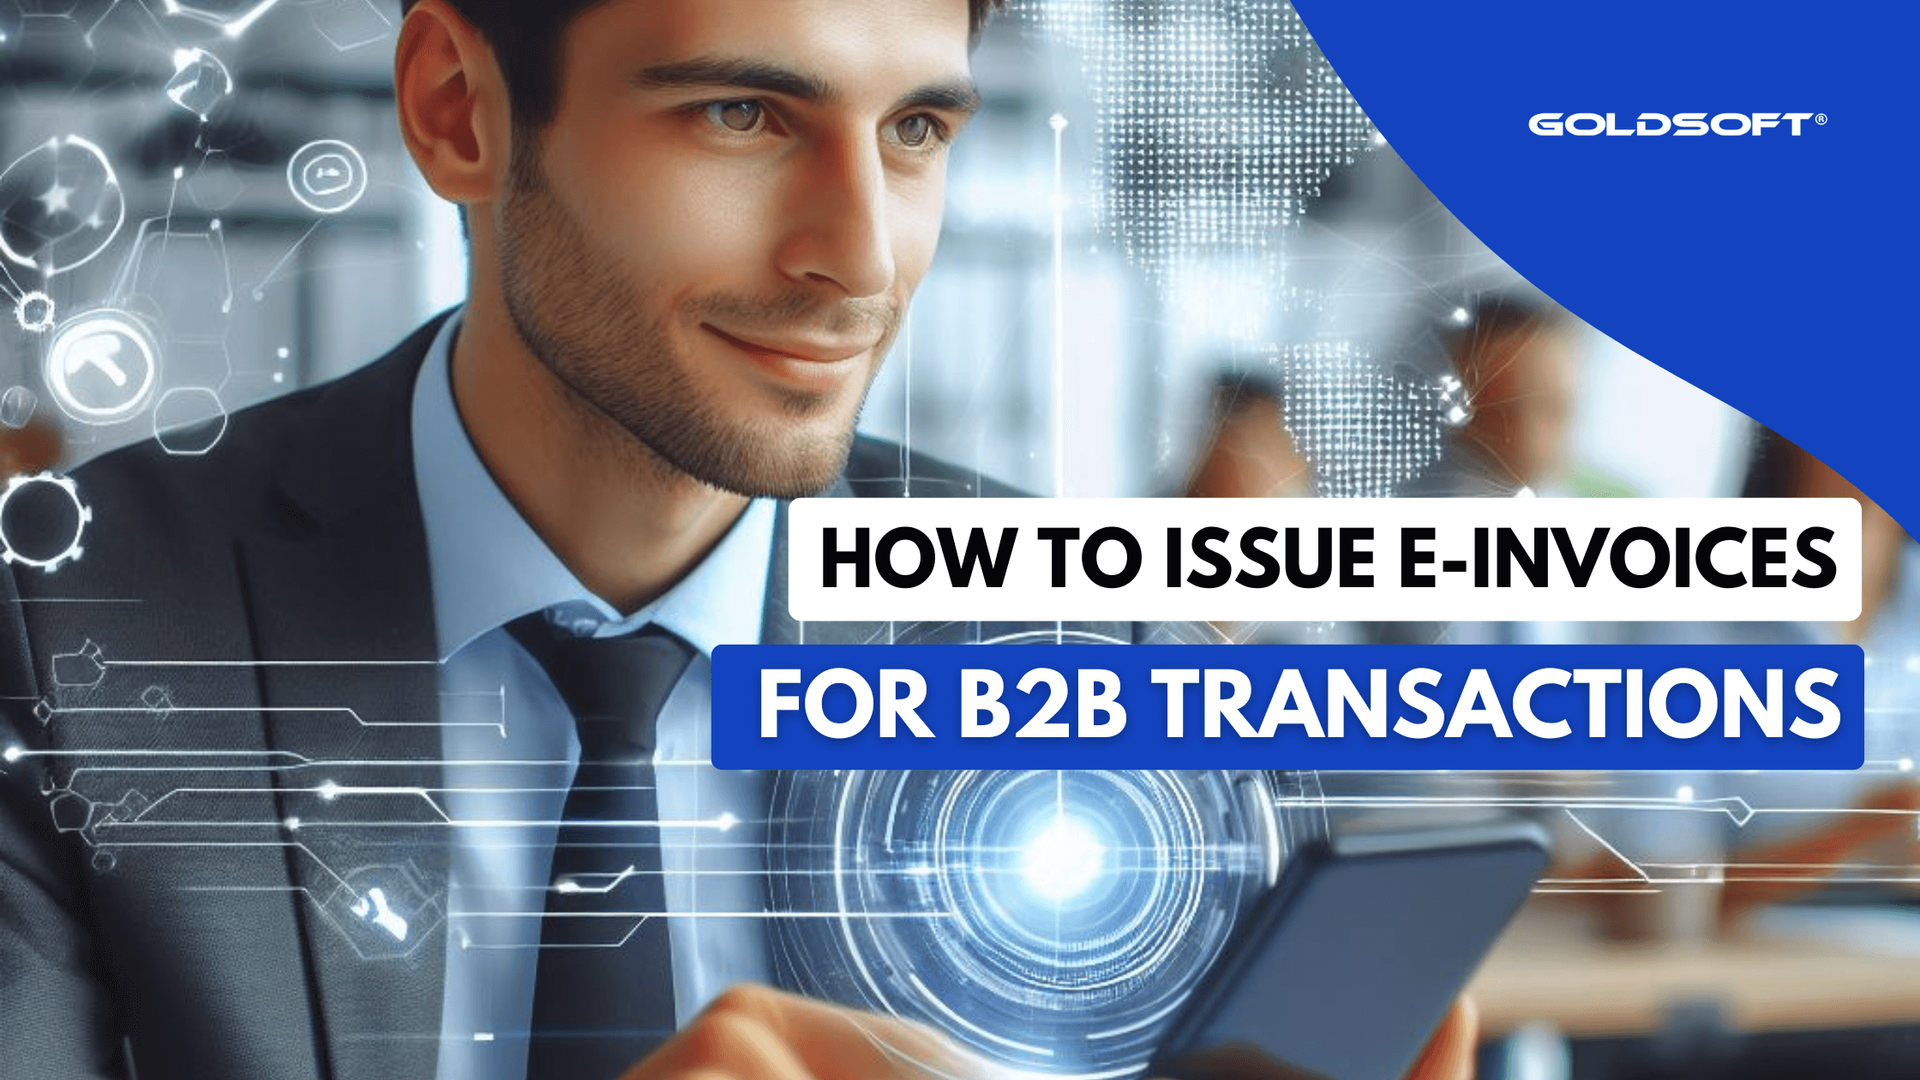 How to issue e-invoices for b2b transactions